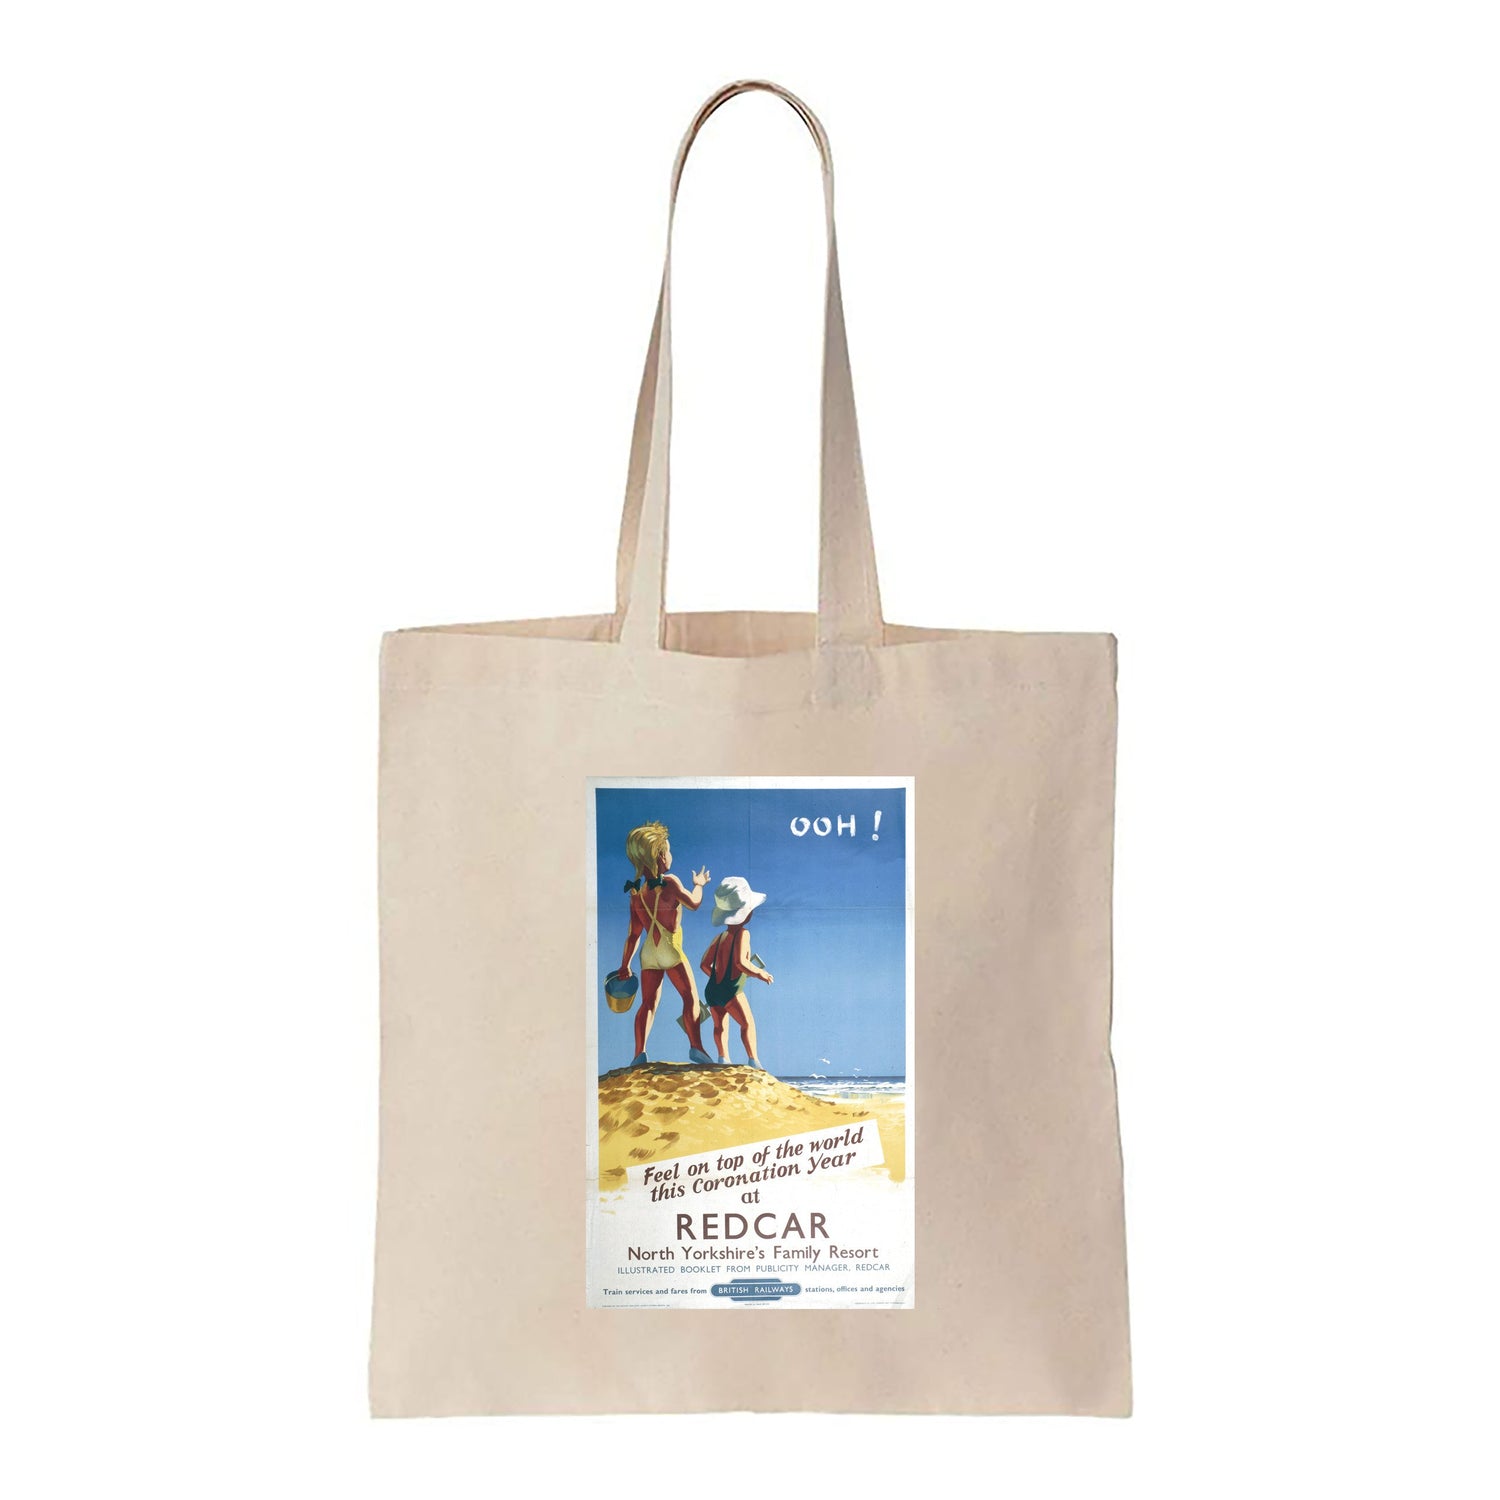 Redcar - North Yorkshire's Family Resort - Canvas Tote Bag